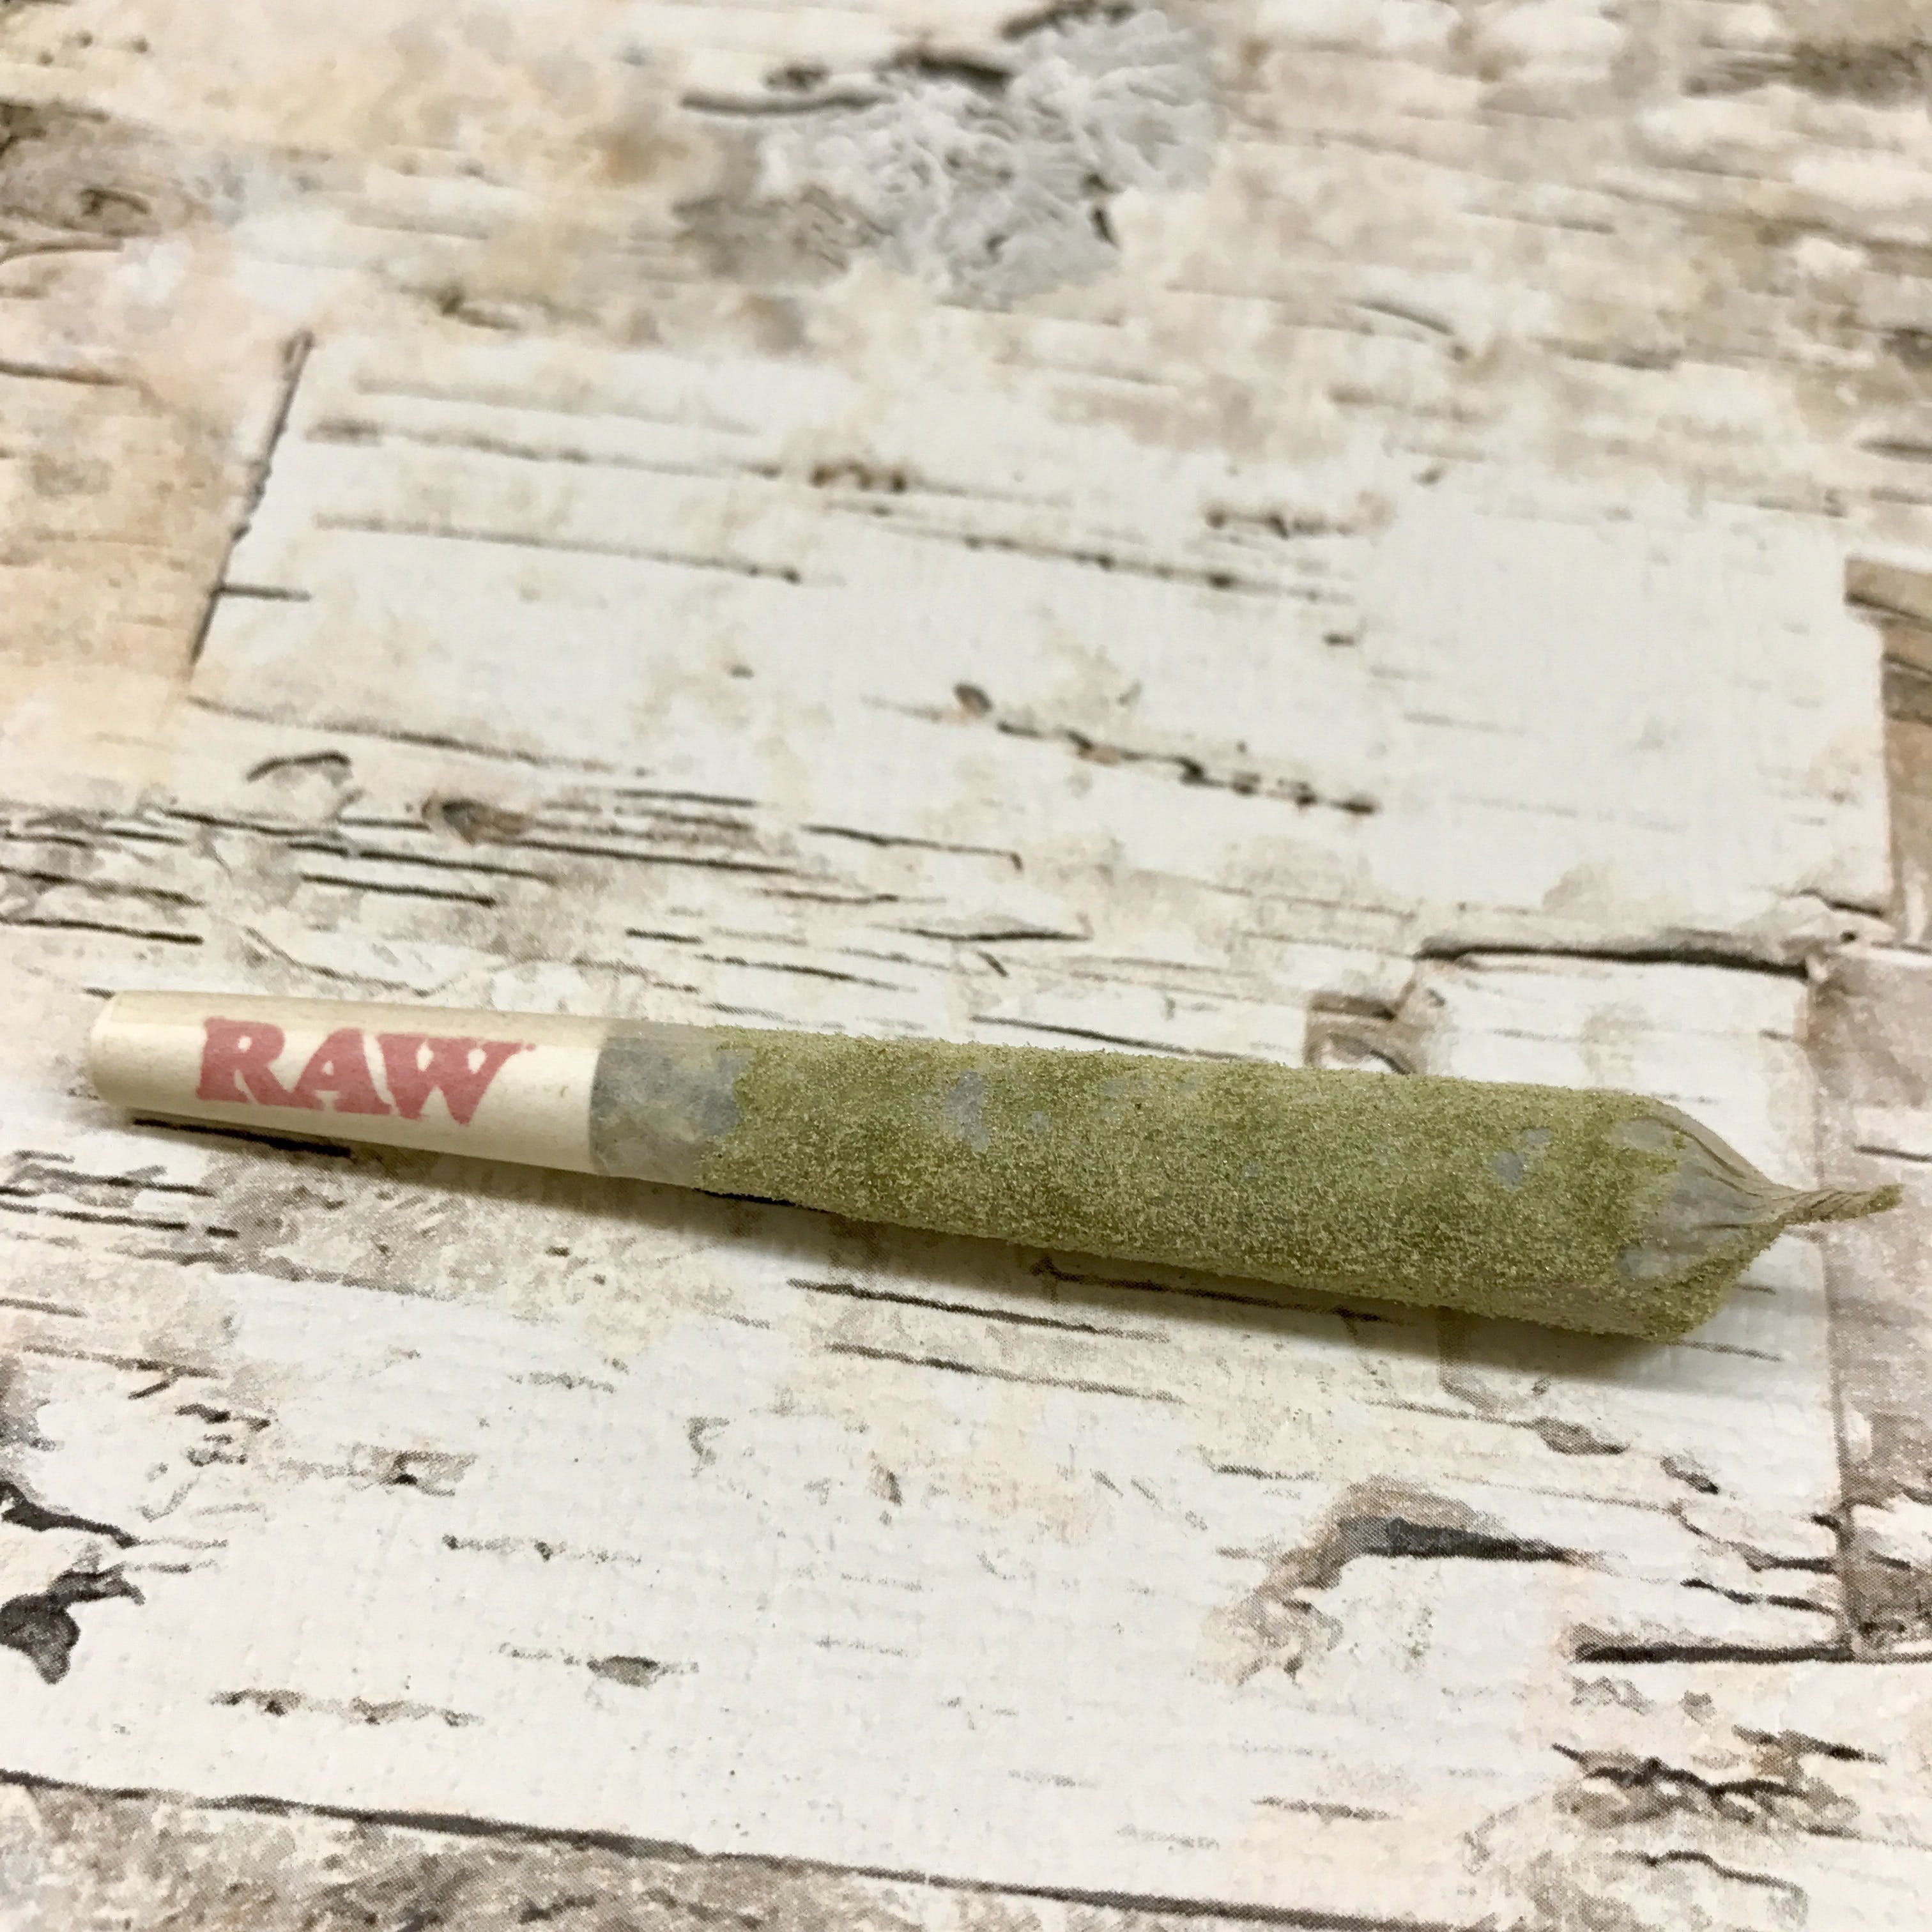 Flo OG joint painted with distillate and rolled in Kief